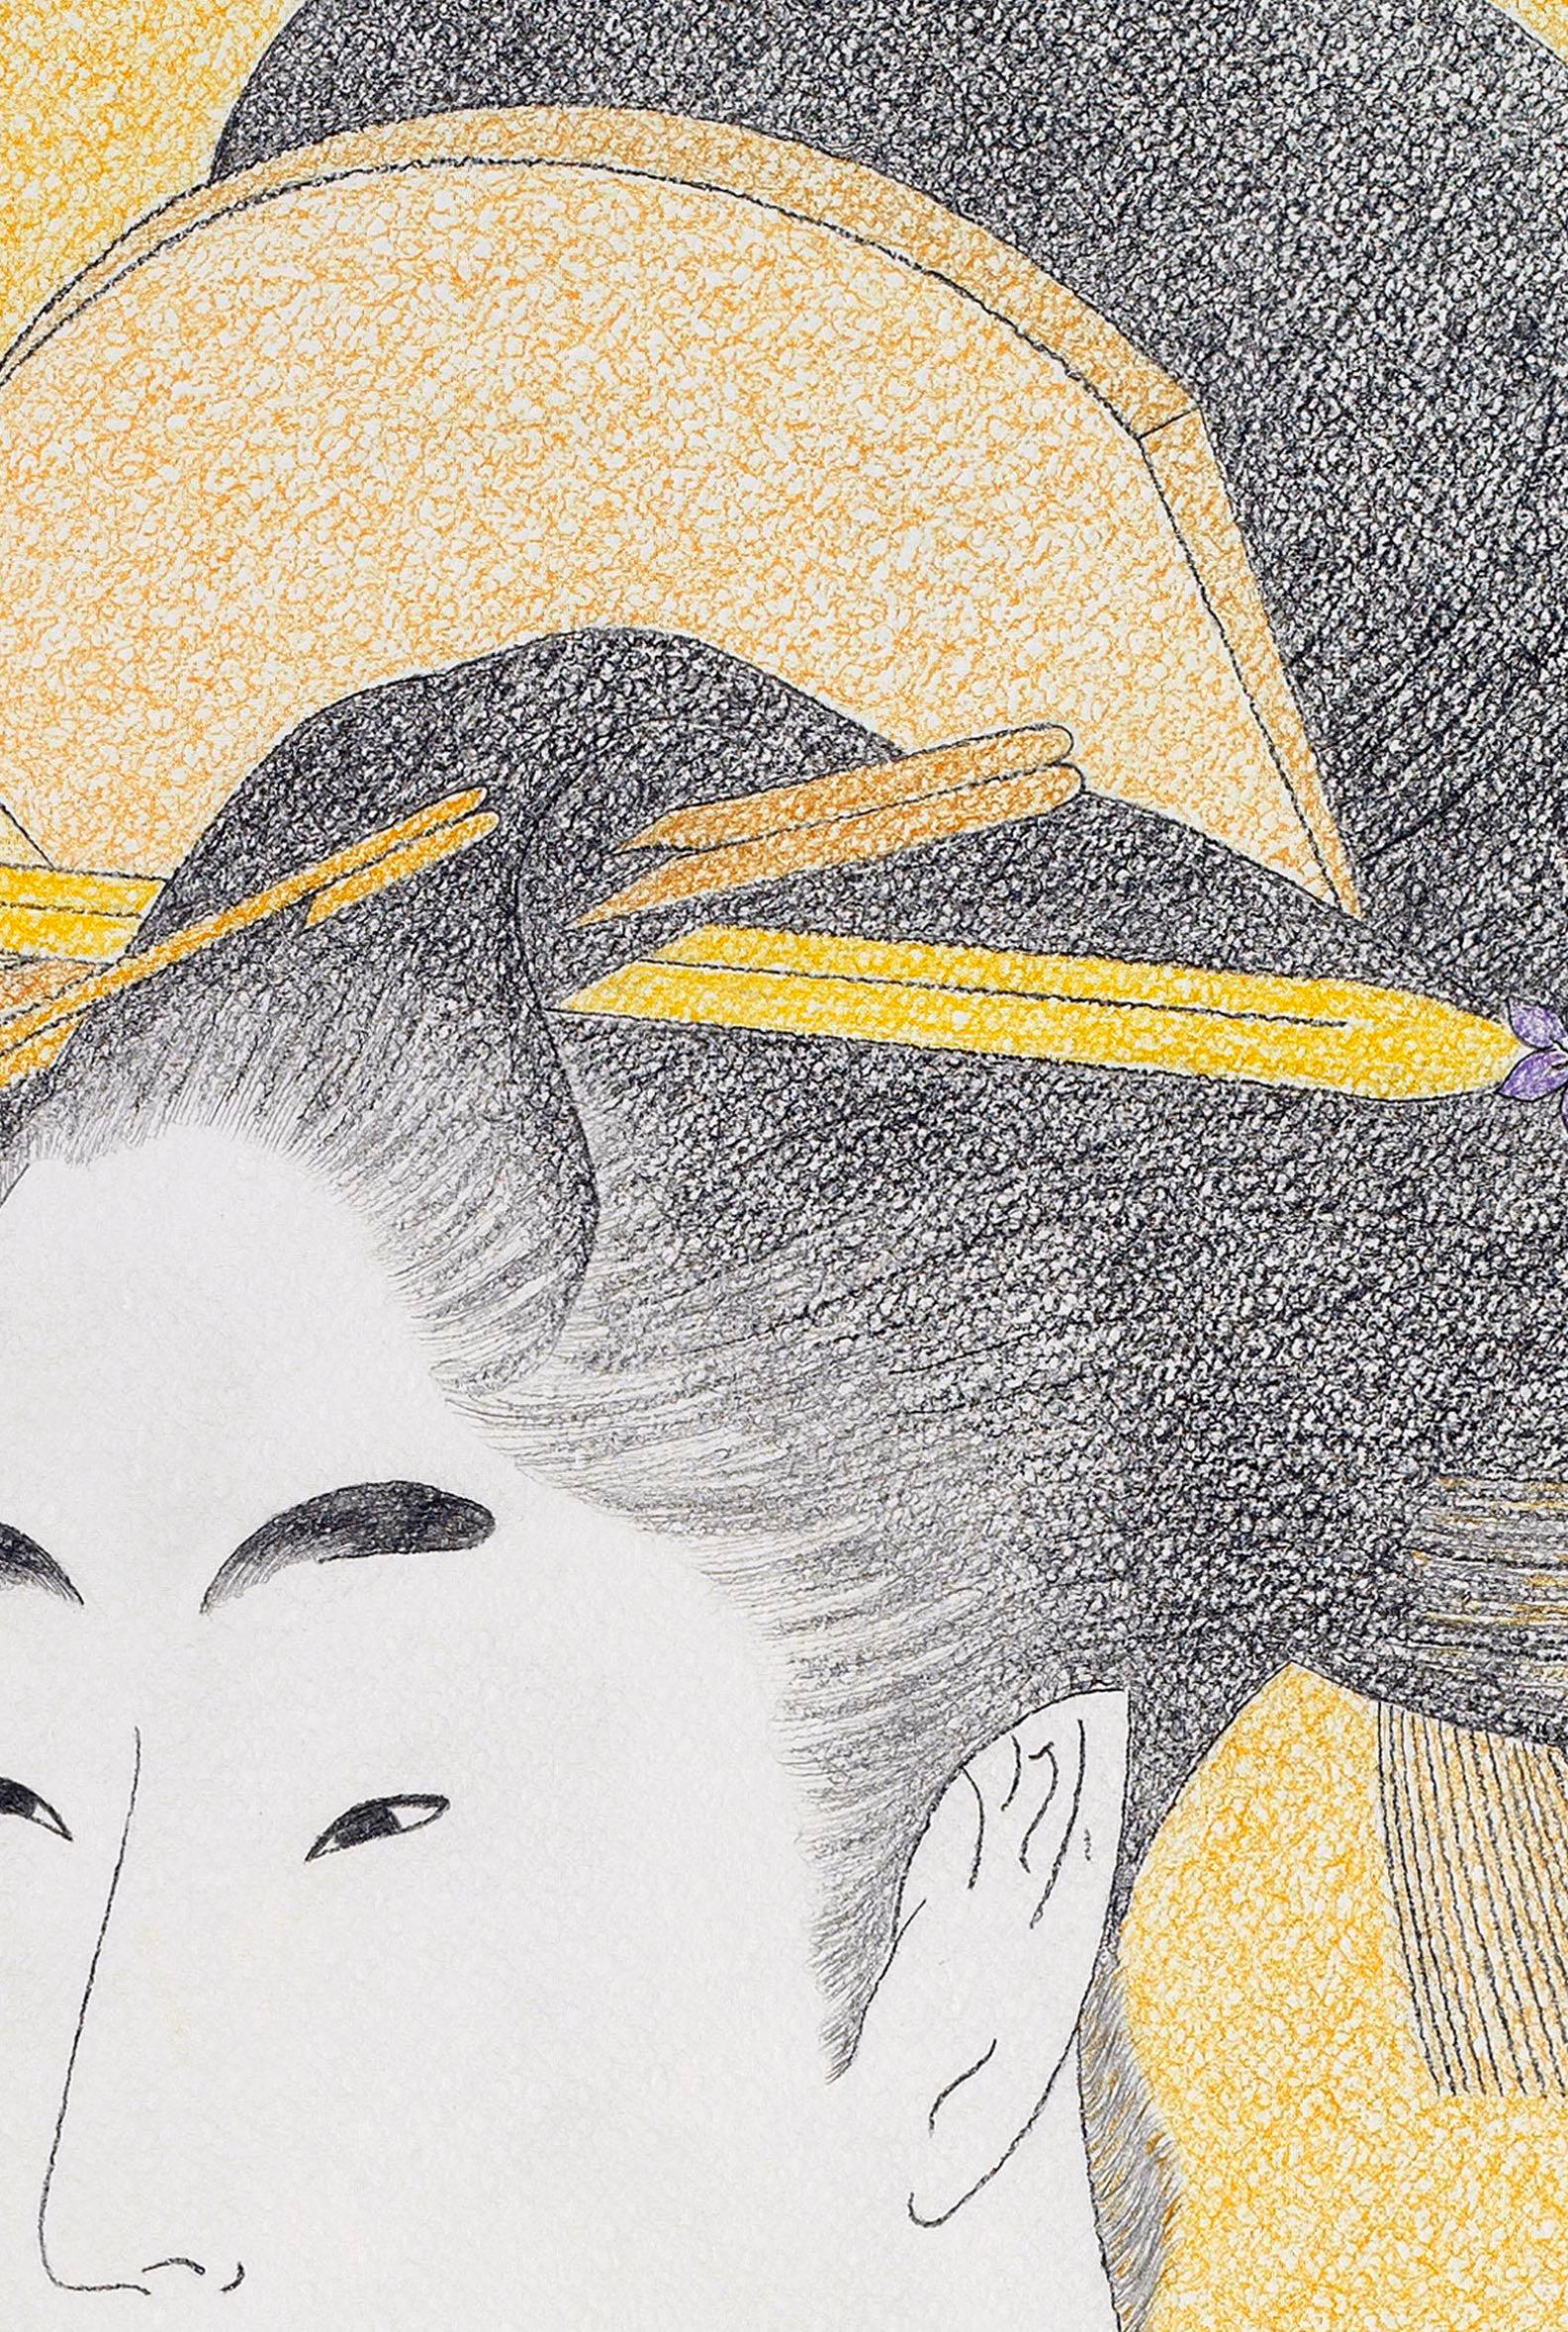 Bijin-ga series XXIX (Nº 29)

Title: Bijin Ôkubi

Upper torso portrait of a Japanese beauty, depicted with a graceful hand gesture and an ornate headdress. Her soft round features contrast with the colourful sharp angles of the collars of her